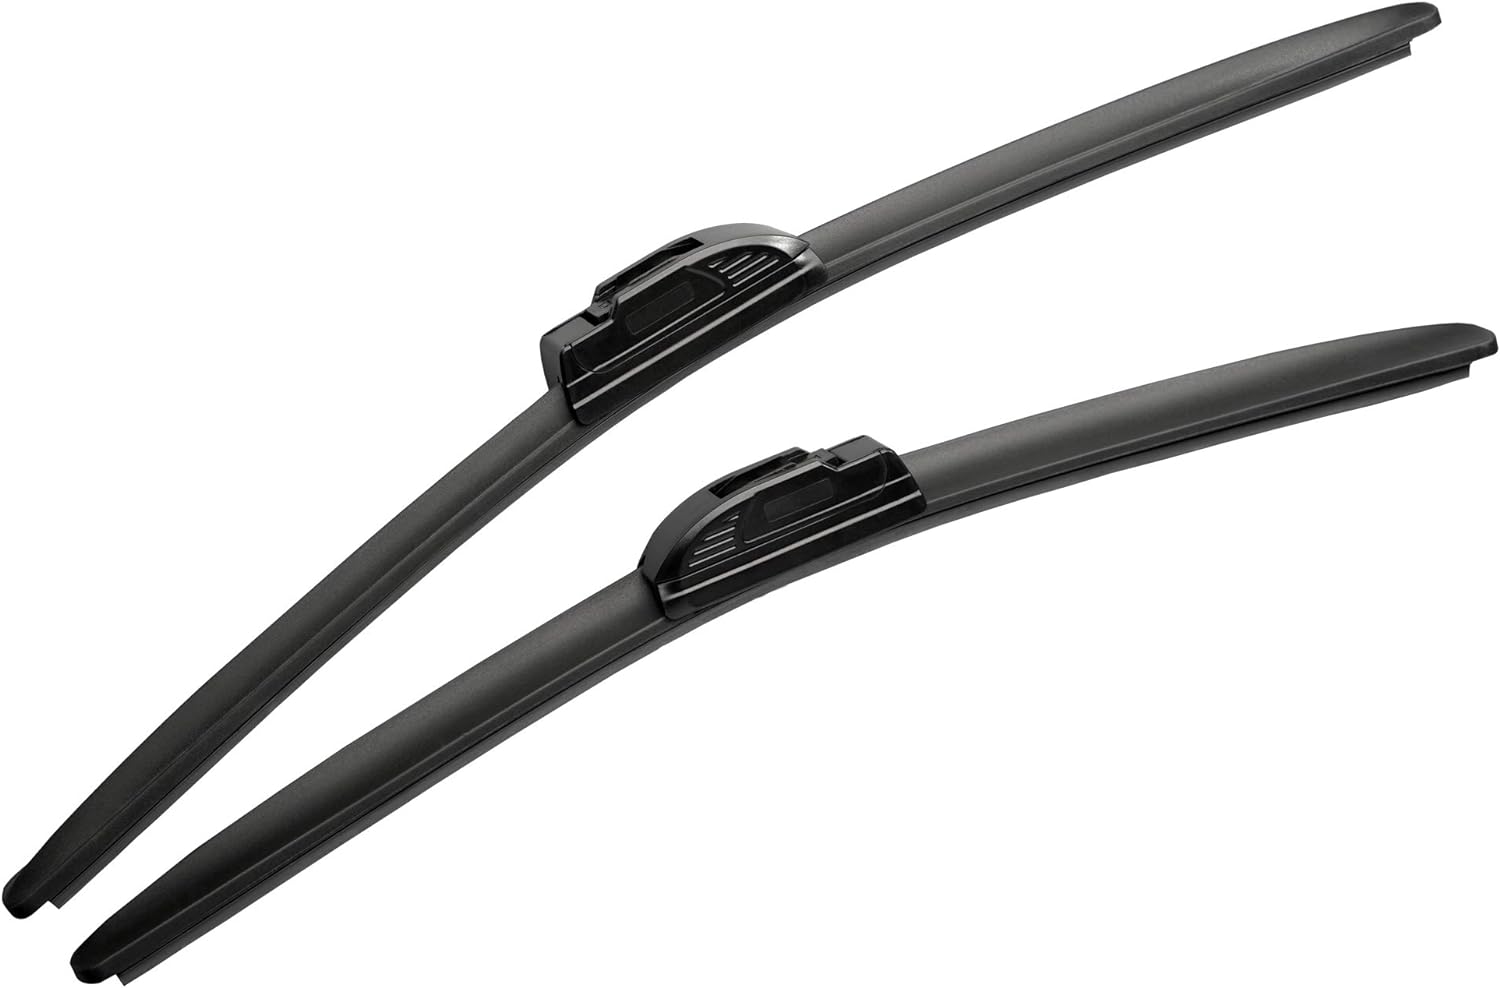 MOTIUM 18"+18" Super Silicone Windshield Wiper Blades, Fit for J hook Wiper Arms (set of 2)